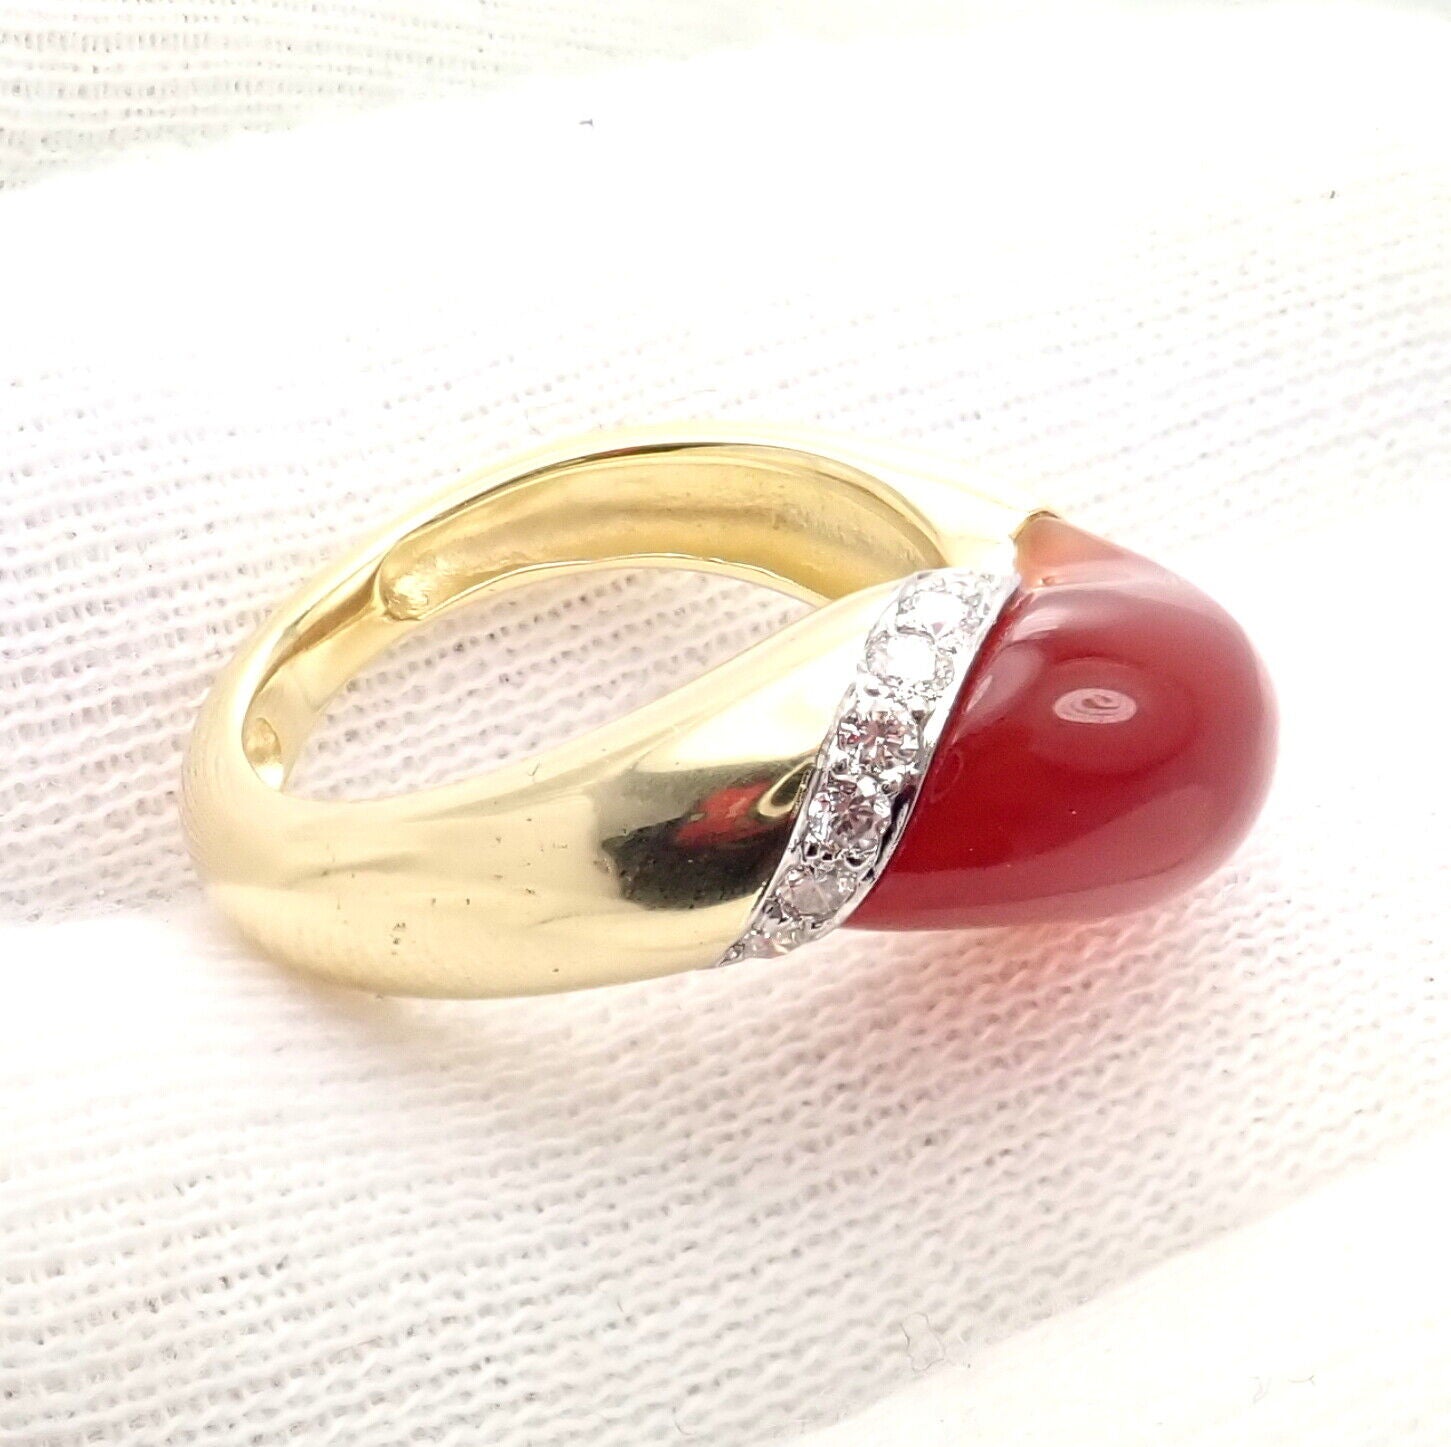 Tiffany & Co. Jewelry & Watches:Fine Jewelry:Rings Rare! Authentic Tiffany & Co 18k Yellow Gold Diamond Curved Carnelian Ring sz 6